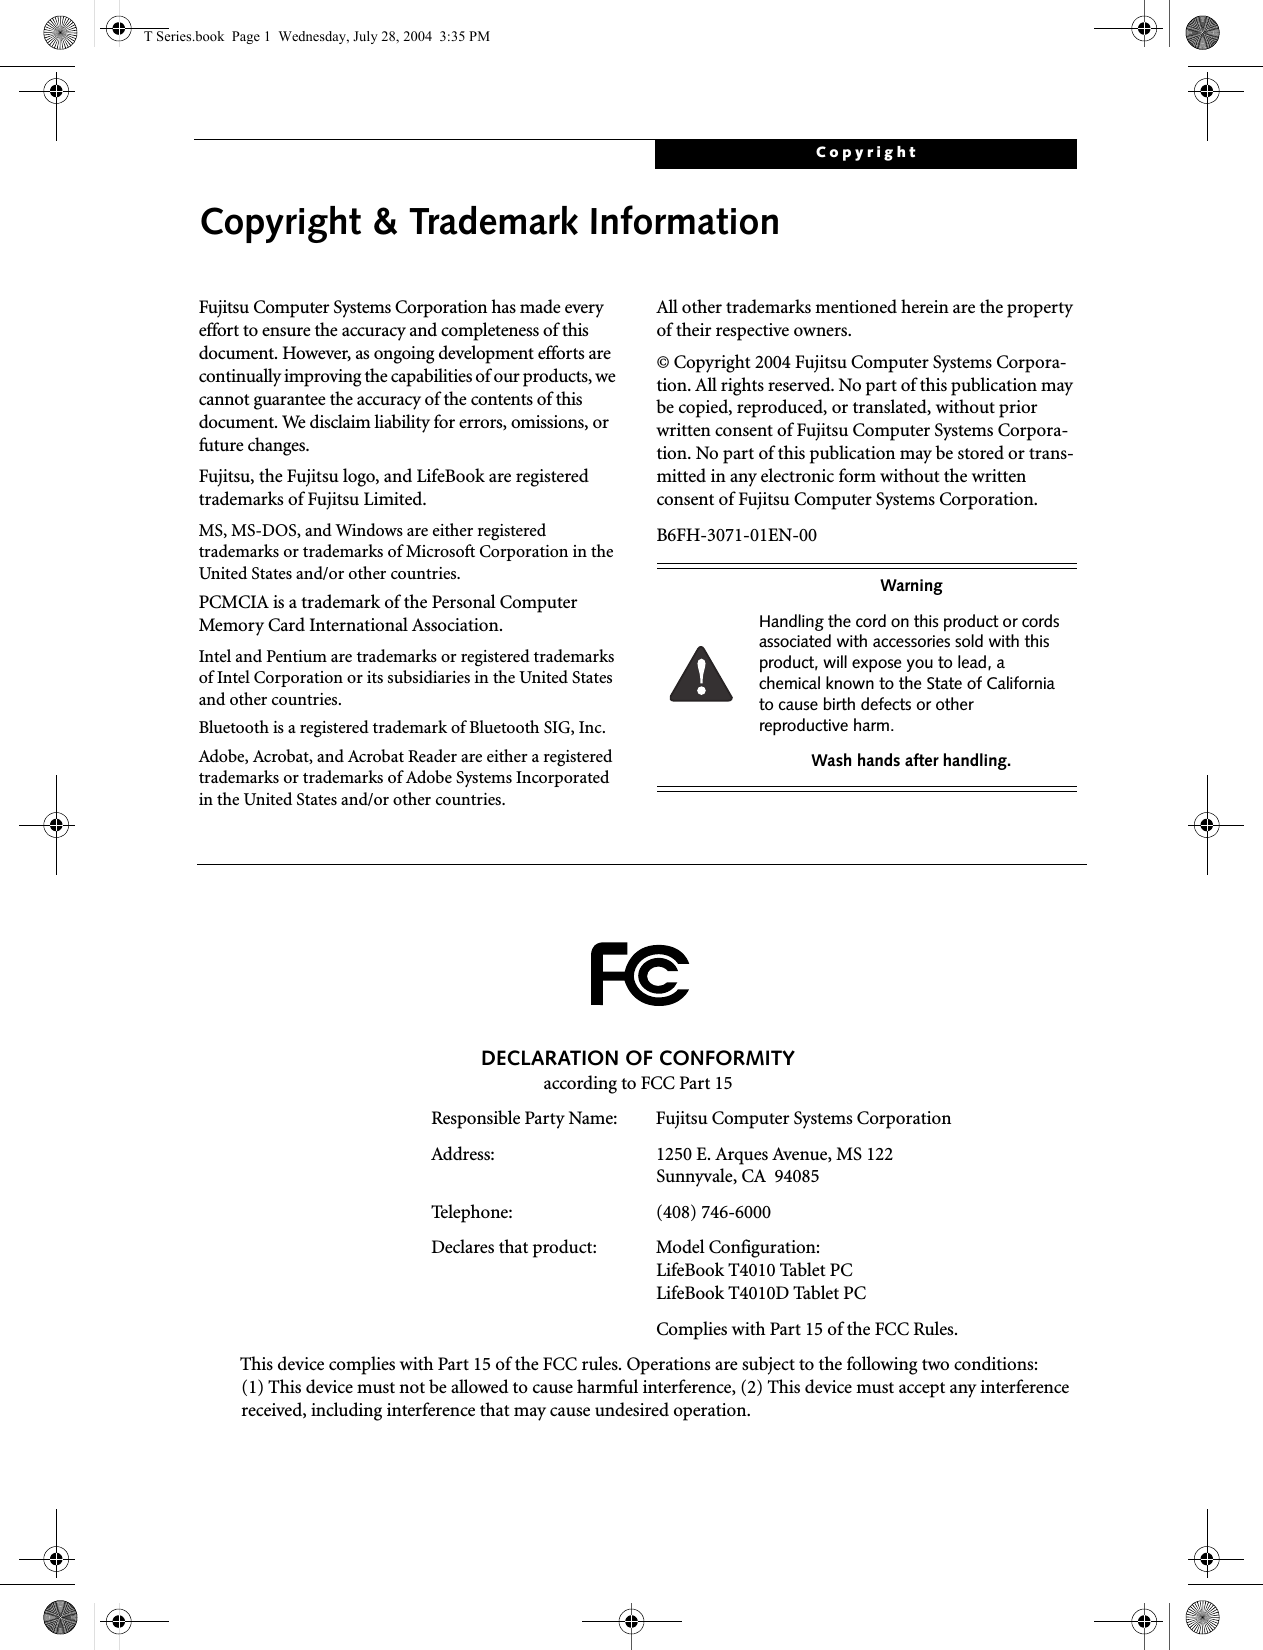 CopyrightCopyright &amp; Trademark InformationFujitsu Computer Systems Corporation has made every effort to ensure the accuracy and completeness of this document. However, as ongoing development efforts are continually improving the capabilities of our products, we cannot guarantee the accuracy of the contents of this document. We disclaim liability for errors, omissions, or future changes.Fujitsu, the Fujitsu logo, and LifeBook are registered trademarks of Fujitsu Limited.MS, MS-DOS, and Windows are either registered trademarks or trademarks of Microsoft Corporation in the United States and/or other countries.PCMCIA is a trademark of the Personal Computer Memory Card International Association.Intel and Pentium are trademarks or registered trademarks of Intel Corporation or its subsidiaries in the United States and other countries.Bluetooth is a registered trademark of Bluetooth SIG, Inc.Adobe, Acrobat, and Acrobat Reader are either a registered trademarks or trademarks of Adobe Systems Incorporated in the United States and/or other countries.All other trademarks mentioned herein are the property of their respective owners.© Copyright 2004 Fujitsu Computer Systems Corpora-tion. All rights reserved. No part of this publication may be copied, reproduced, or translated, without prior written consent of Fujitsu Computer Systems Corpora-tion. No part of this publication may be stored or trans-mitted in any electronic form without the written consent of Fujitsu Computer Systems Corporation.B6FH-3071-01EN-00WarningHandling the cord on this product or cords associated with accessories sold with this product, will expose you to lead, a chemical known to the State of California to cause birth defects or other reproductive harm. Wash hands after handling.DECLARATION OF CONFORMITYaccording to FCC Part 15Responsible Party Name: Fujitsu Computer Systems CorporationAddress:  1250 E. Arques Avenue, MS 122Sunnyvale, CA  94085Telephone: (408) 746-6000Declares that product: Model Configuration:LifeBook T4010 Tablet PC LifeBook T4010D Tablet PCComplies with Part 15 of the FCC Rules.This device complies with Part 15 of the FCC rules. Operations are subject to the following two conditions:(1) This device must not be allowed to cause harmful interference, (2) This device must accept any interference received, including interference that may cause undesired operation.T Series.book  Page 1  Wednesday, July 28, 2004  3:35 PM